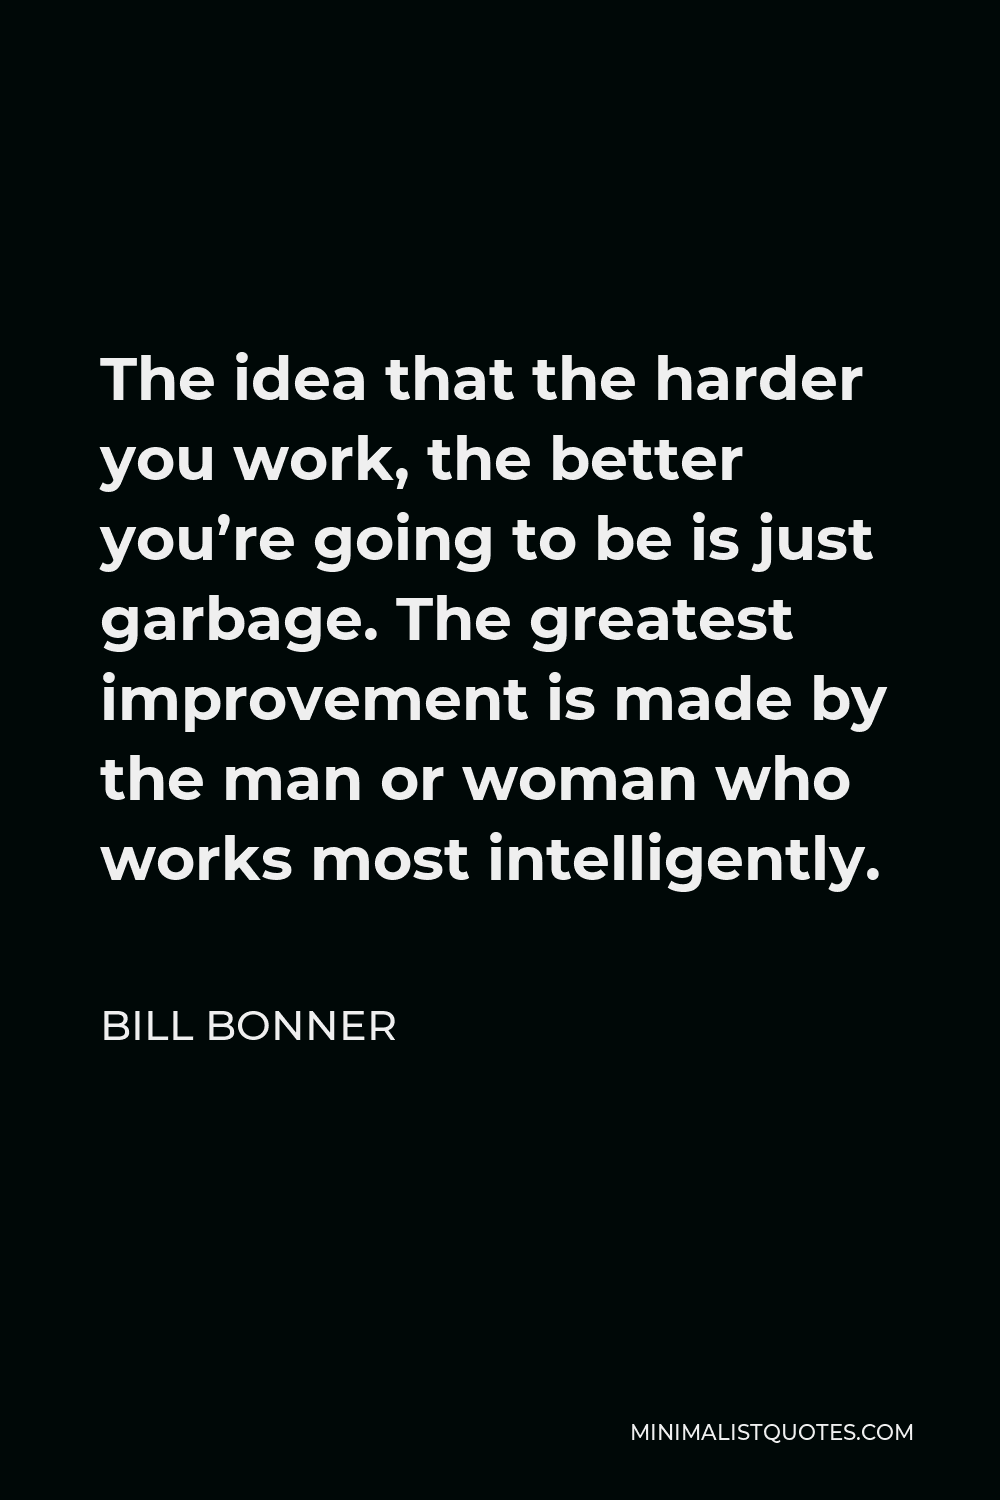 Bill Bonner Quote - The idea that the harder you work, the better you’re going to be is just garbage. The greatest improvement is made by the man or woman who works most intelligently.